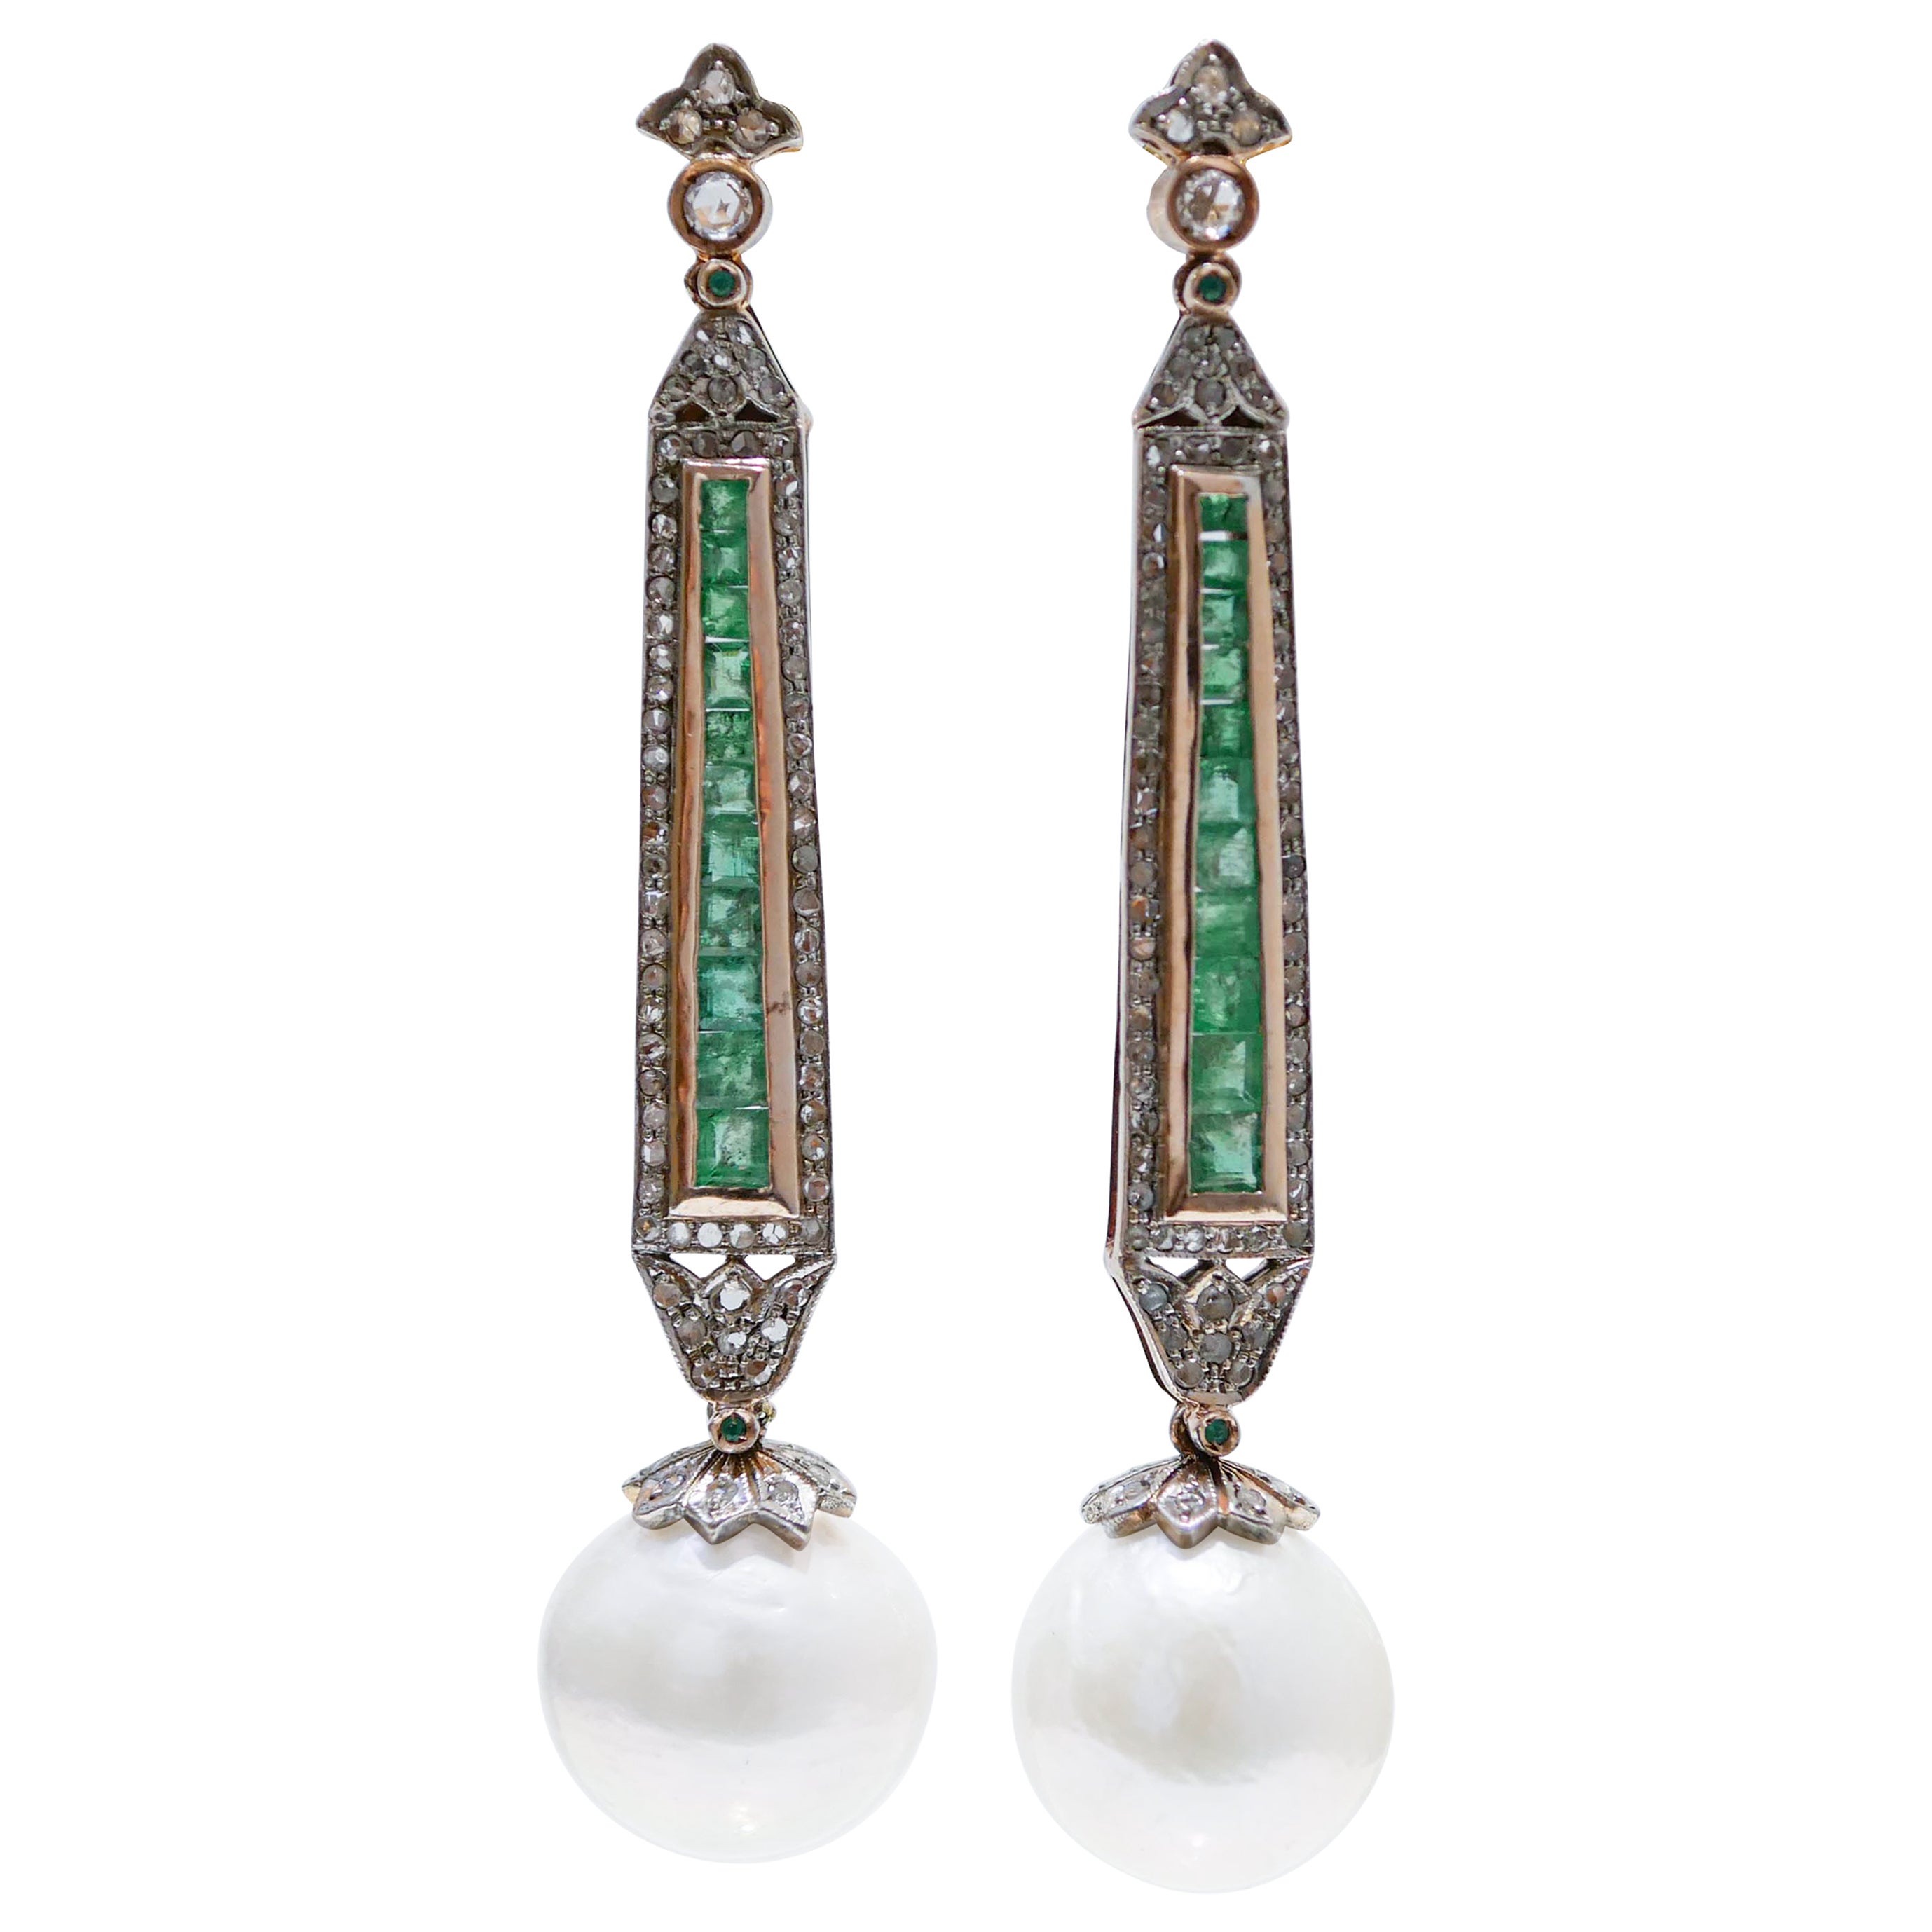 Grey Pearls, Emeralds, Diamonds, 14 Karat Rose Gold and Silver Earrings. For Sale